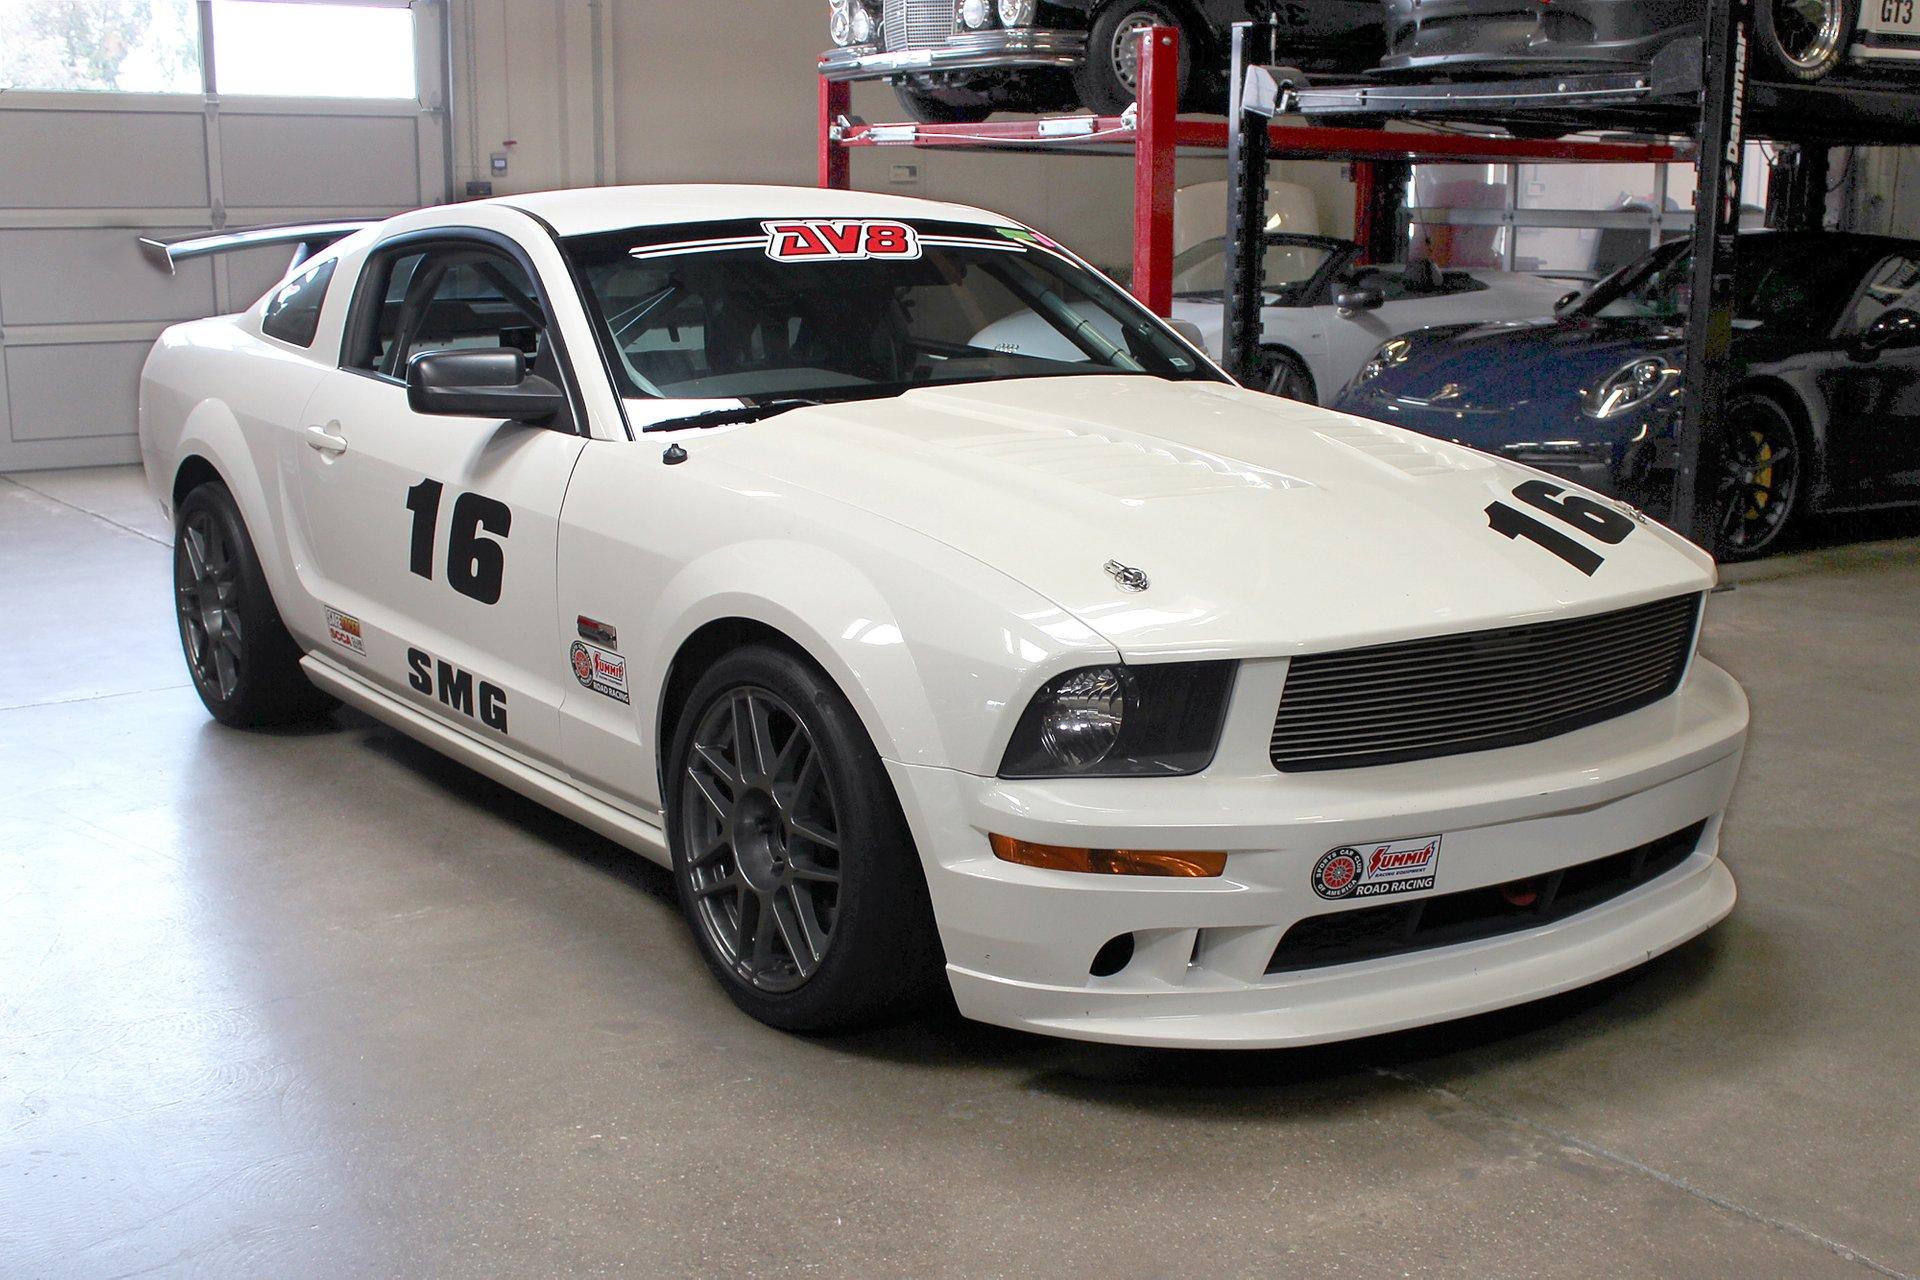 Used 2007 Ford Mustang SMG spec racer for sale Sold at San Francisco Sports Cars in San Carlos CA 94070 1